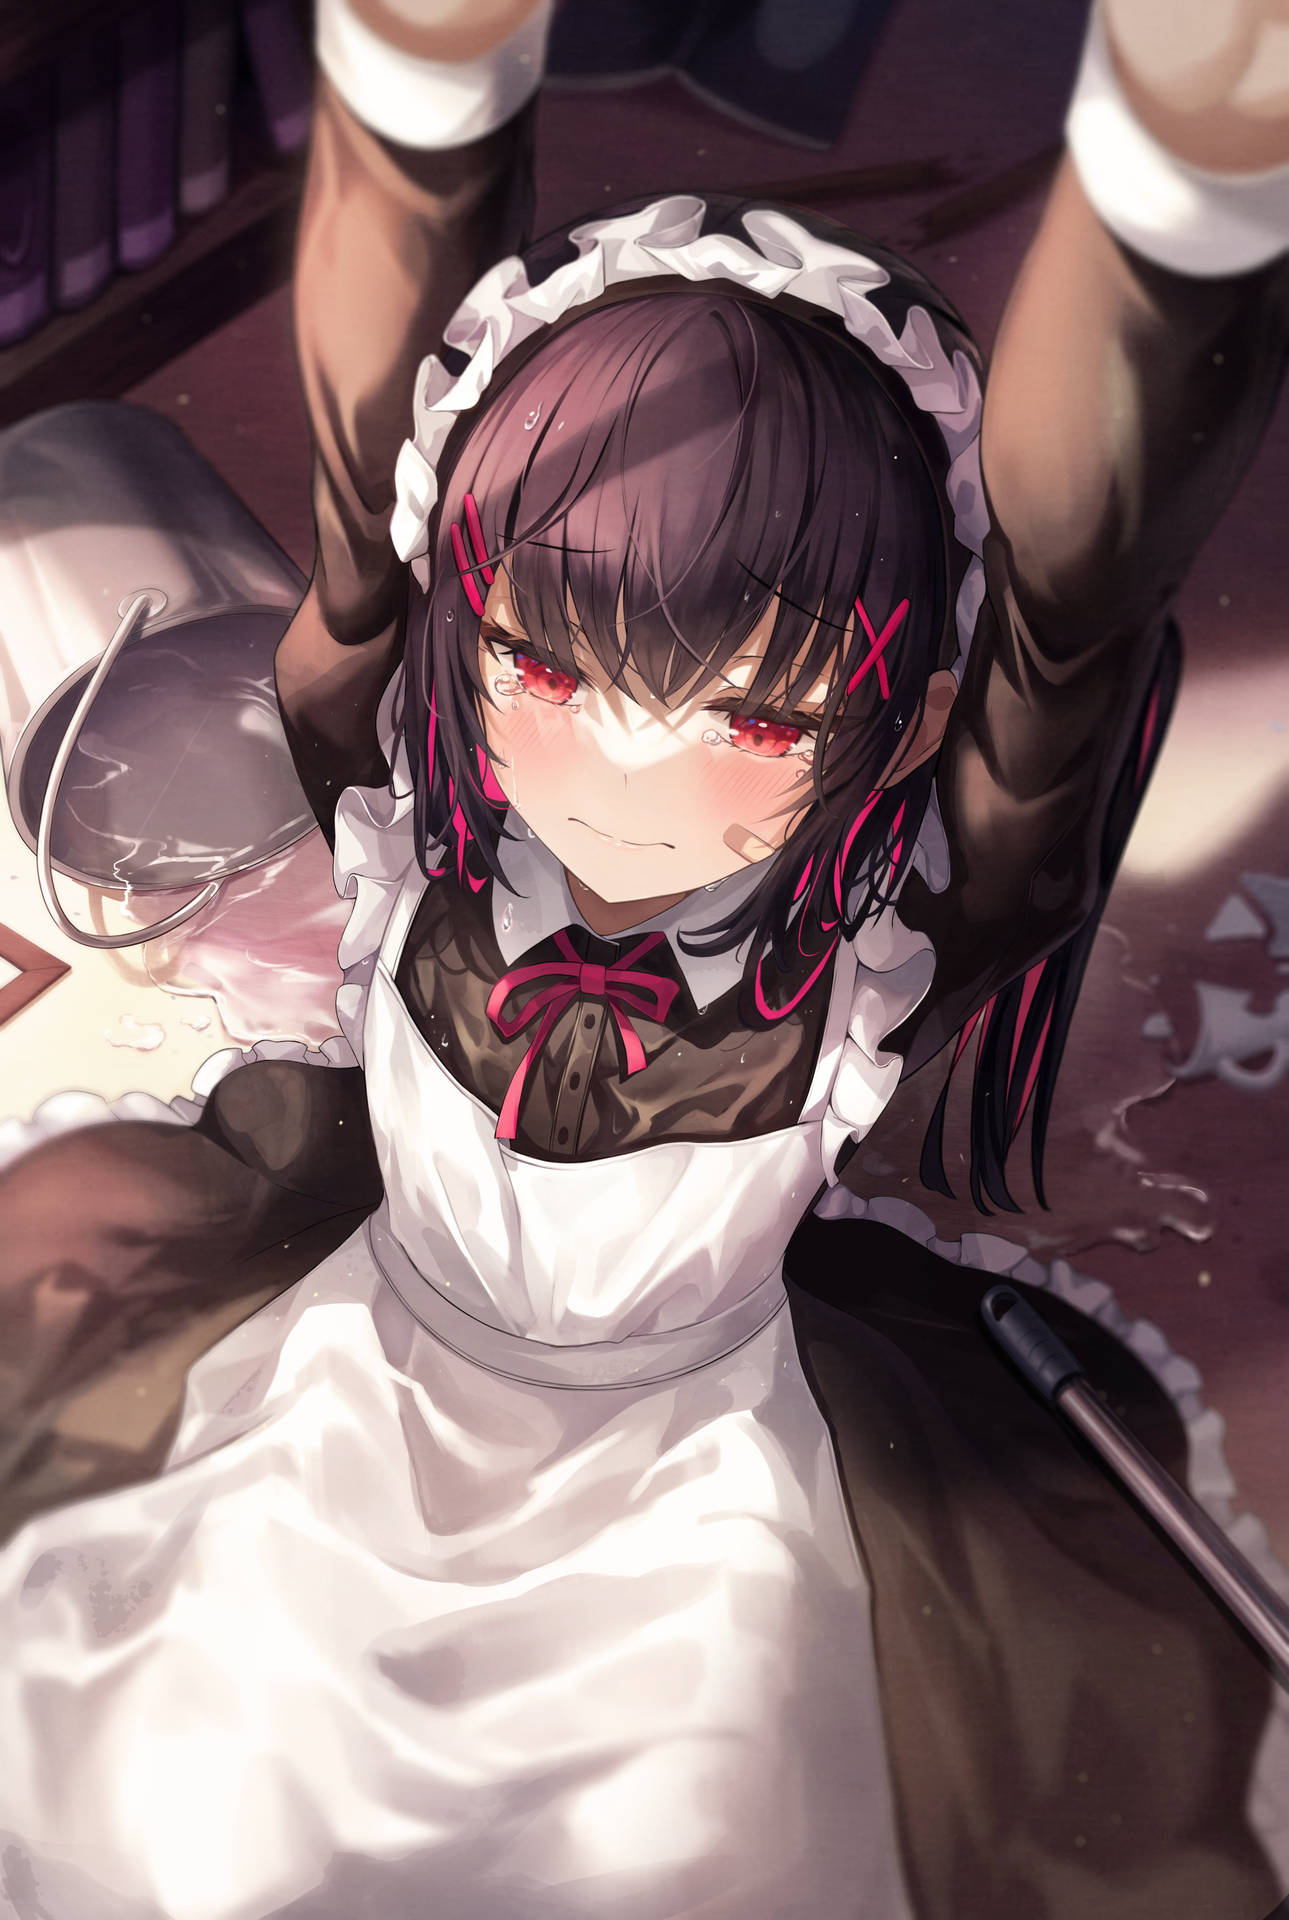 Heart-touching Anime Waifu In Maid Outfit Expressing Emotion Background